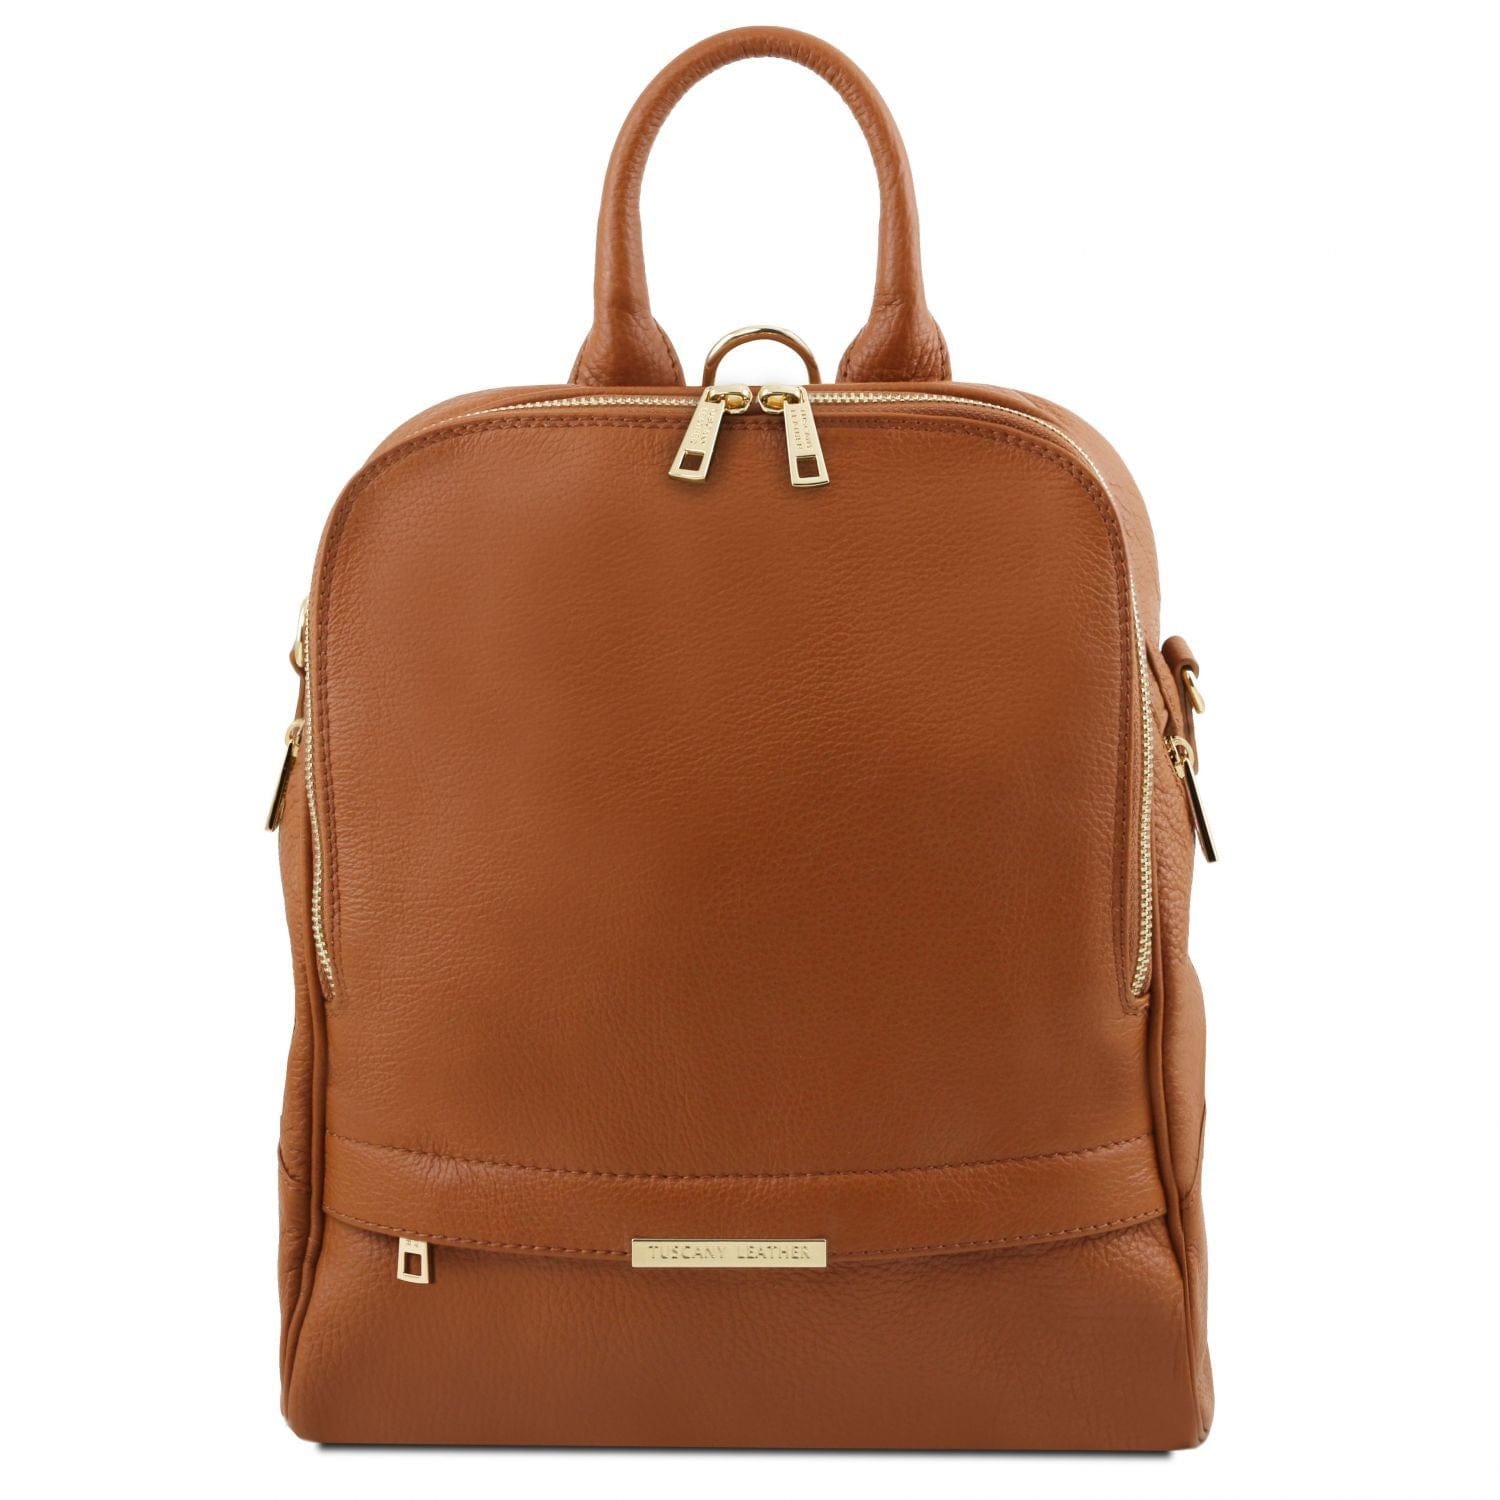 TL Bag - Soft leather backpack for women | TL141376 - Premium Leather backpacks for women - Shop now at San Rocco Italia